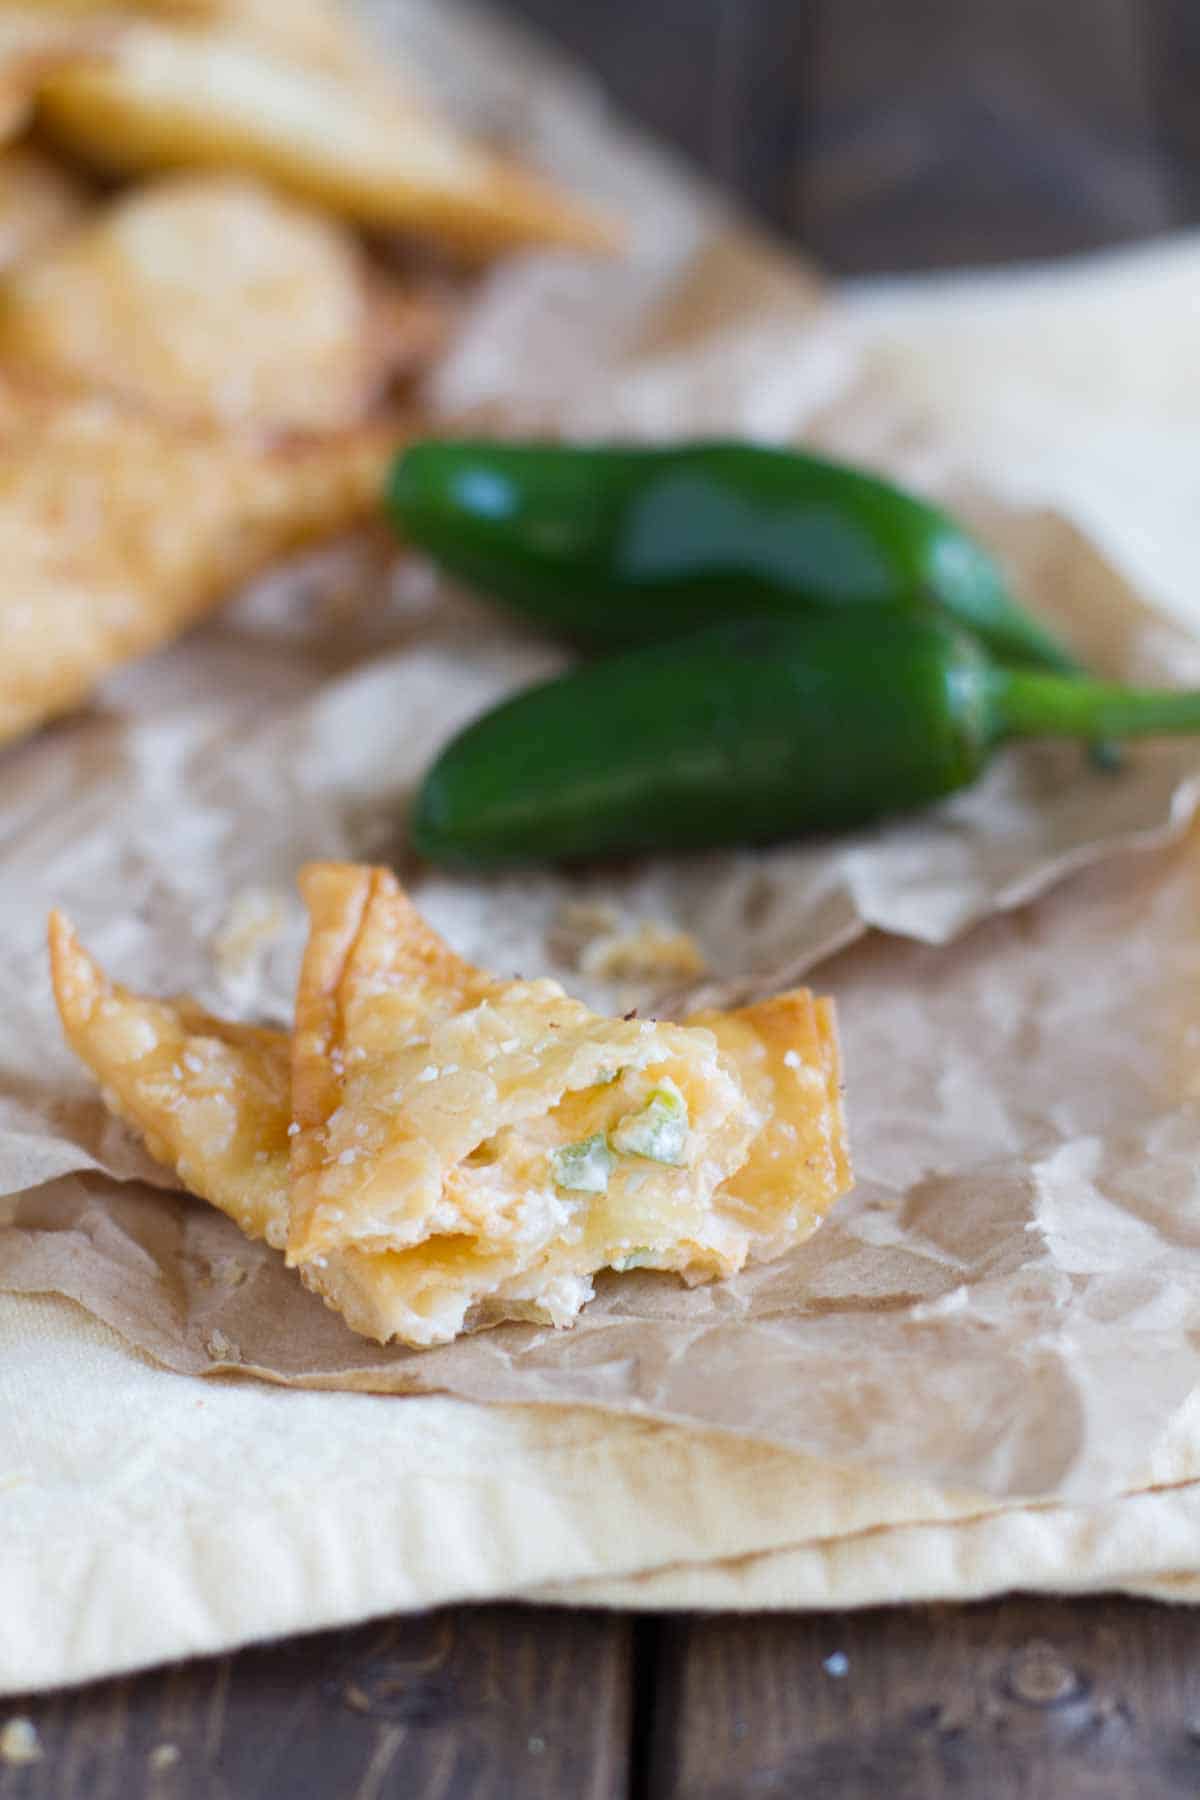 Jalapeno Popper Wonton on paper opened up to show filling.